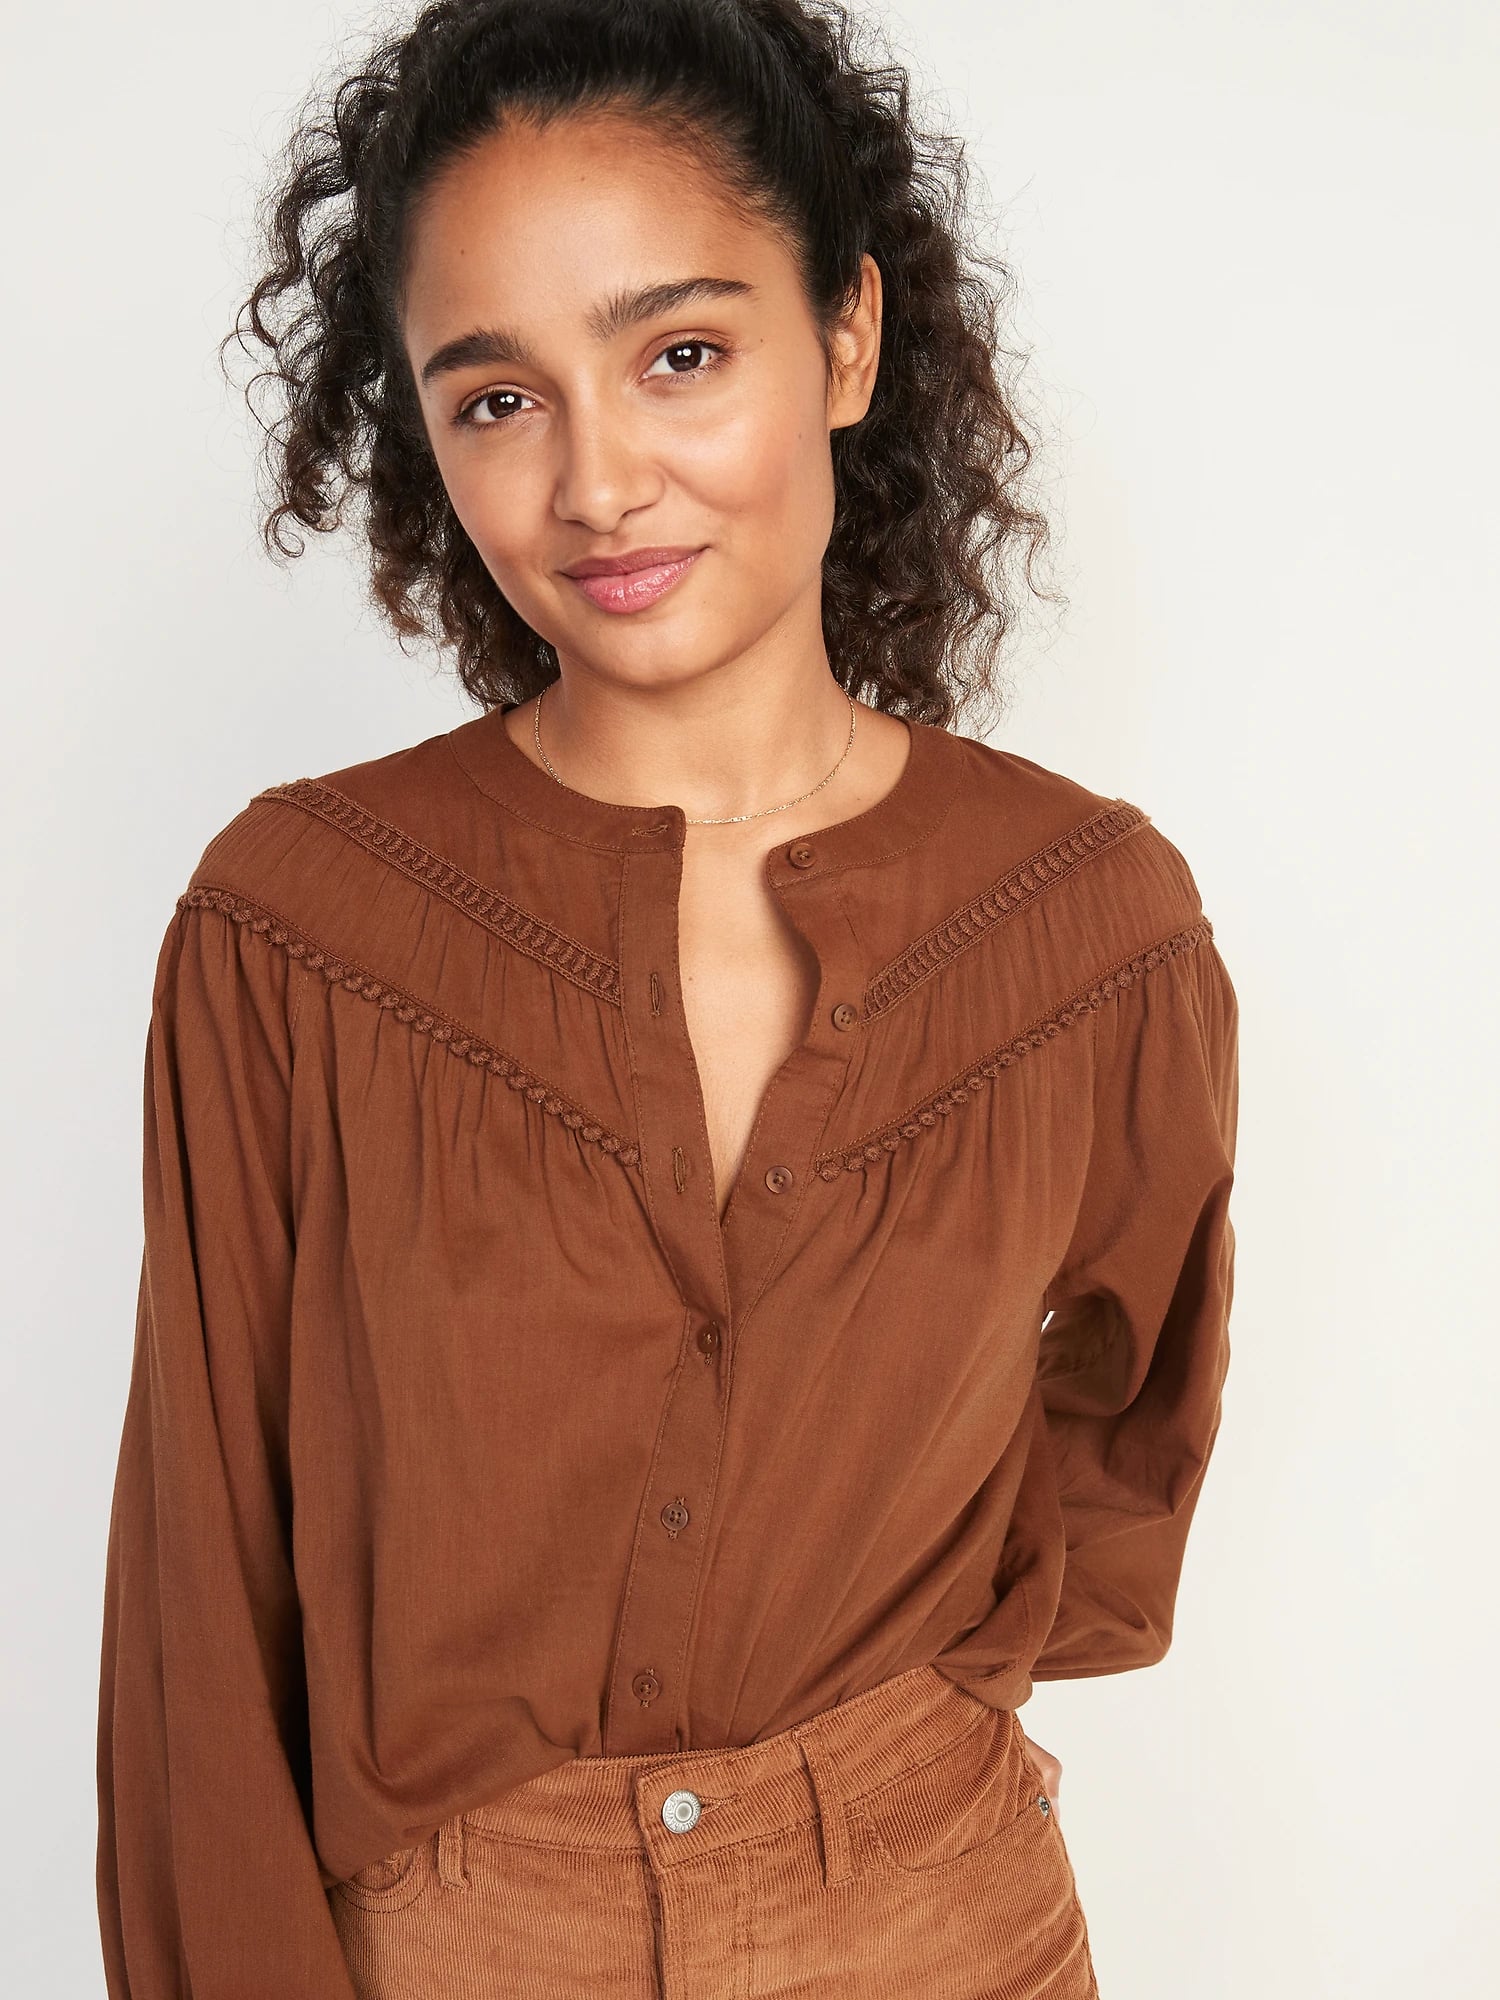 Old Navy Oversized Crochet Pom-Pom Dolman-Sleeve Blouse | 37 Tempting New Pieces We Spotted at This Month, Including So Many Pretty Dresses | POPSUGAR Fashion Photo 22